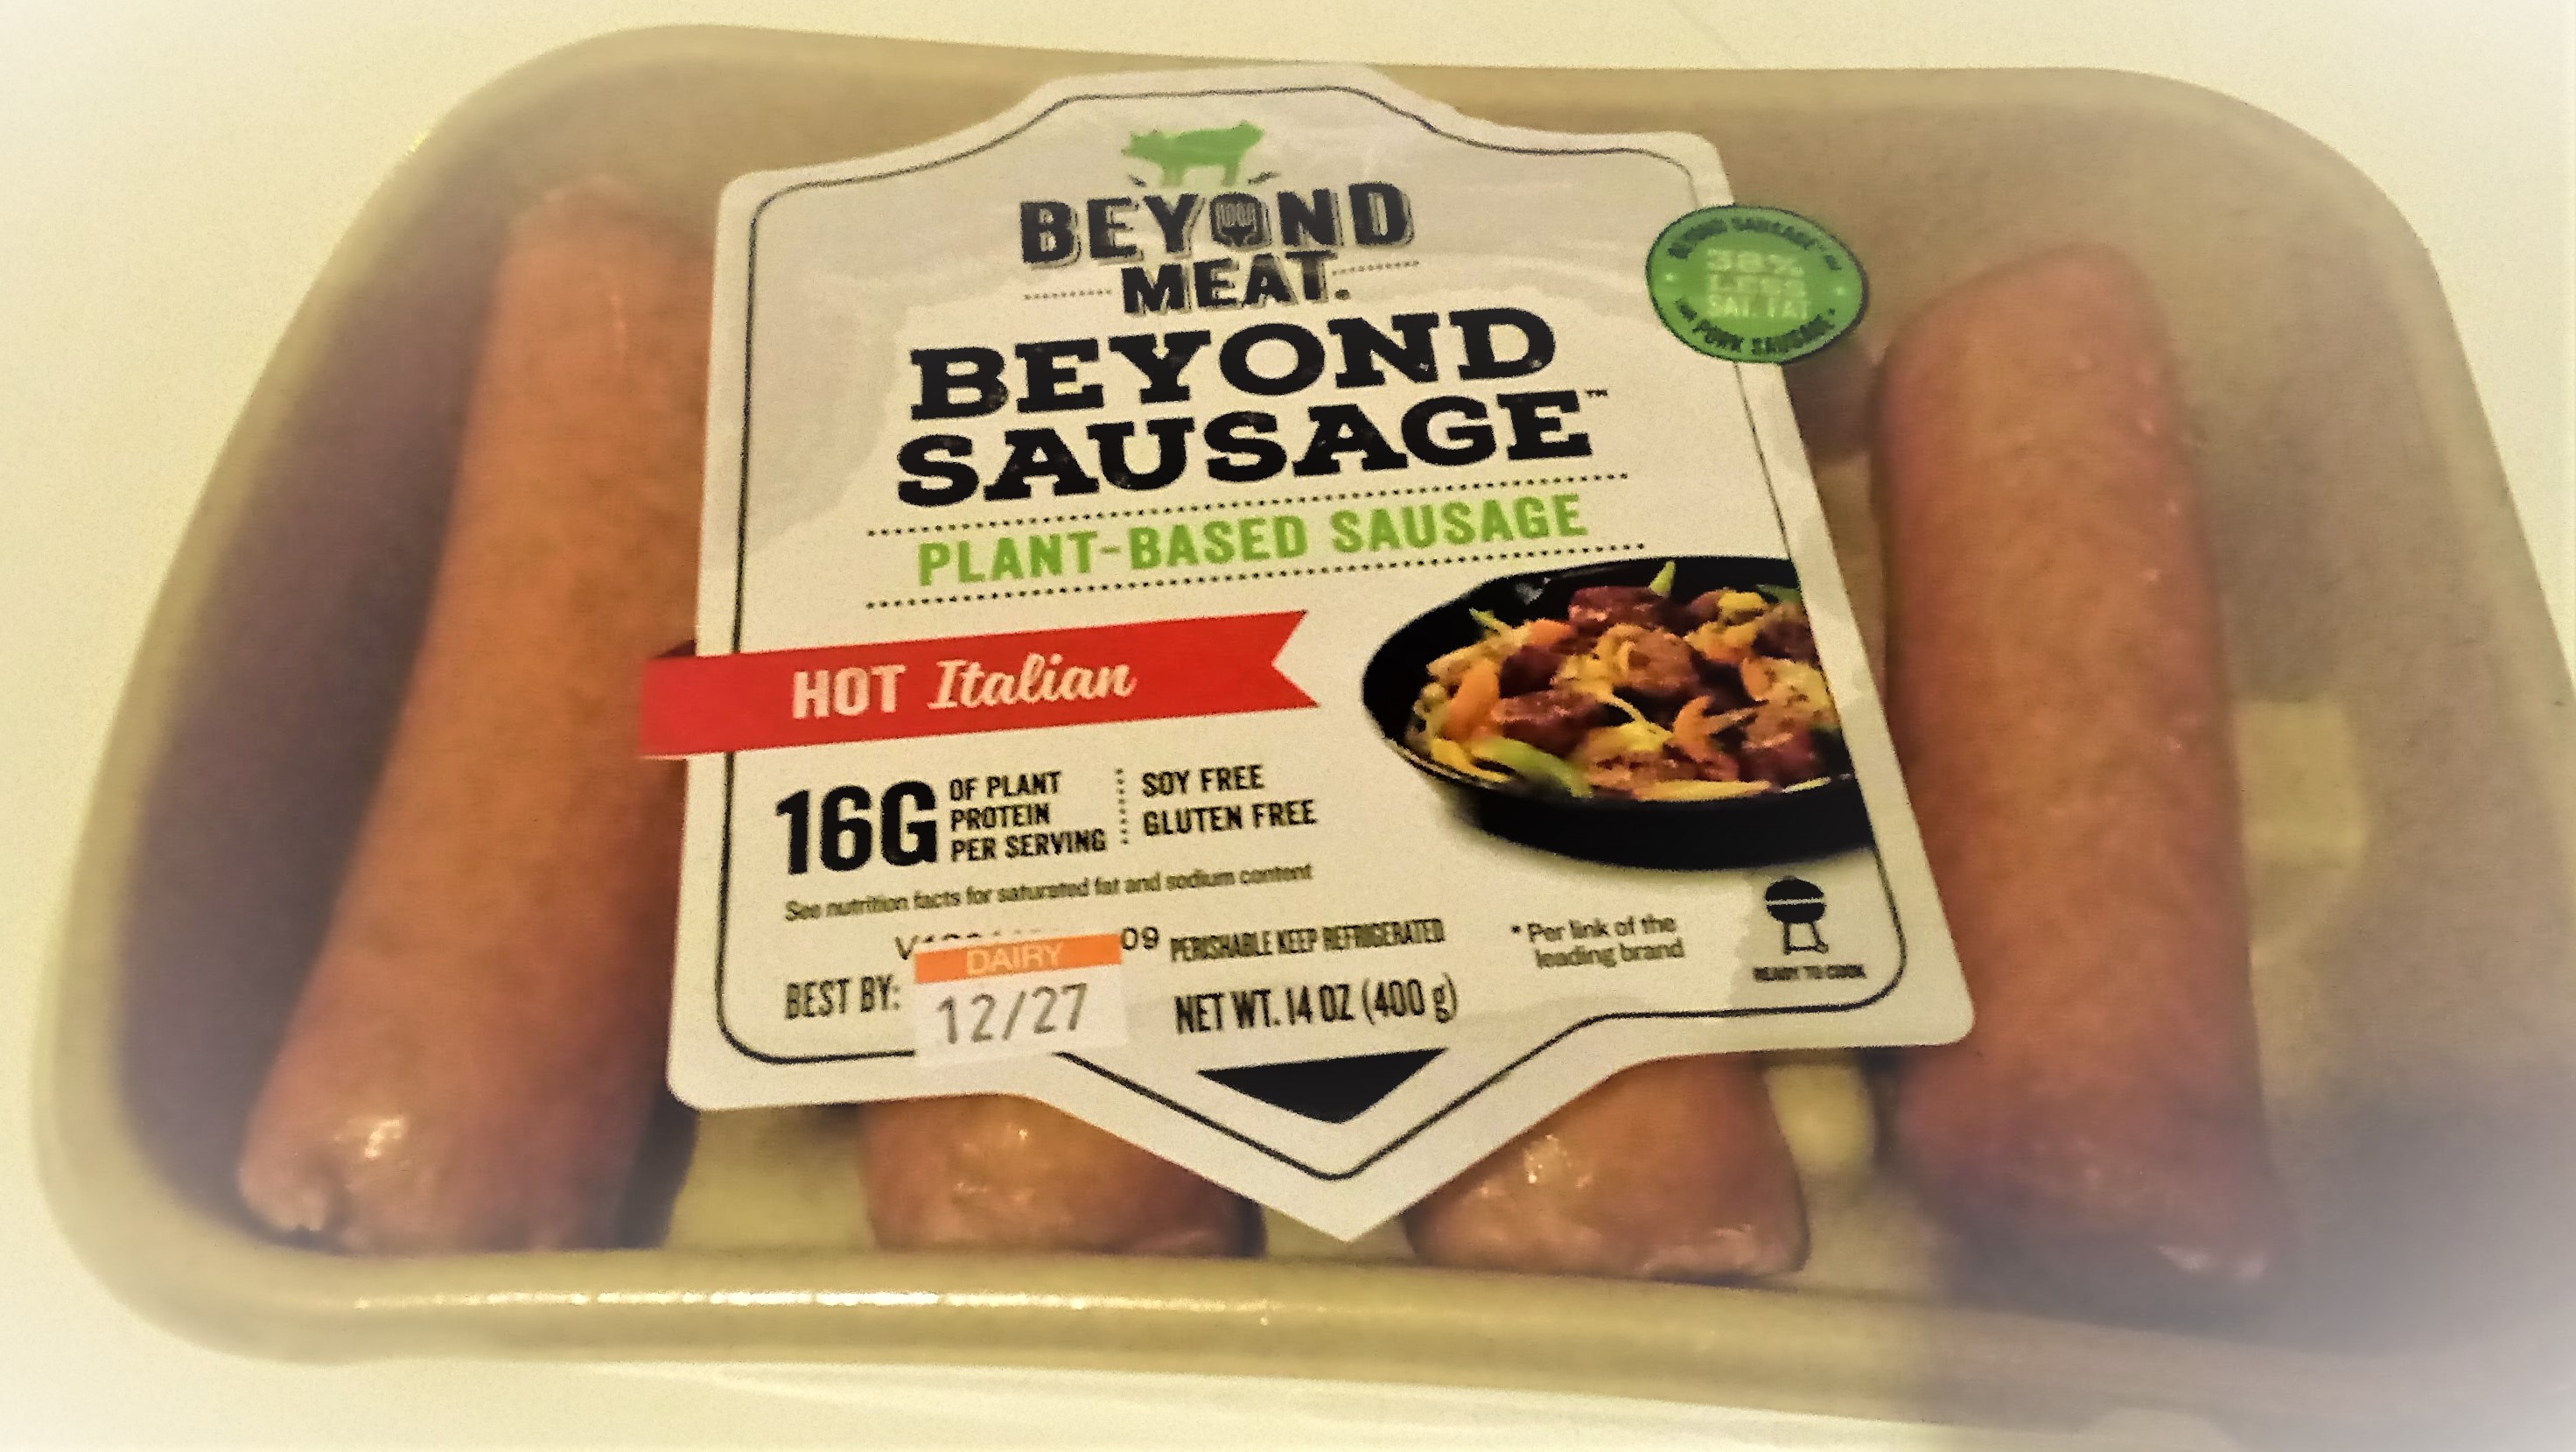 A package of plant-based sausages from Beyond Meat